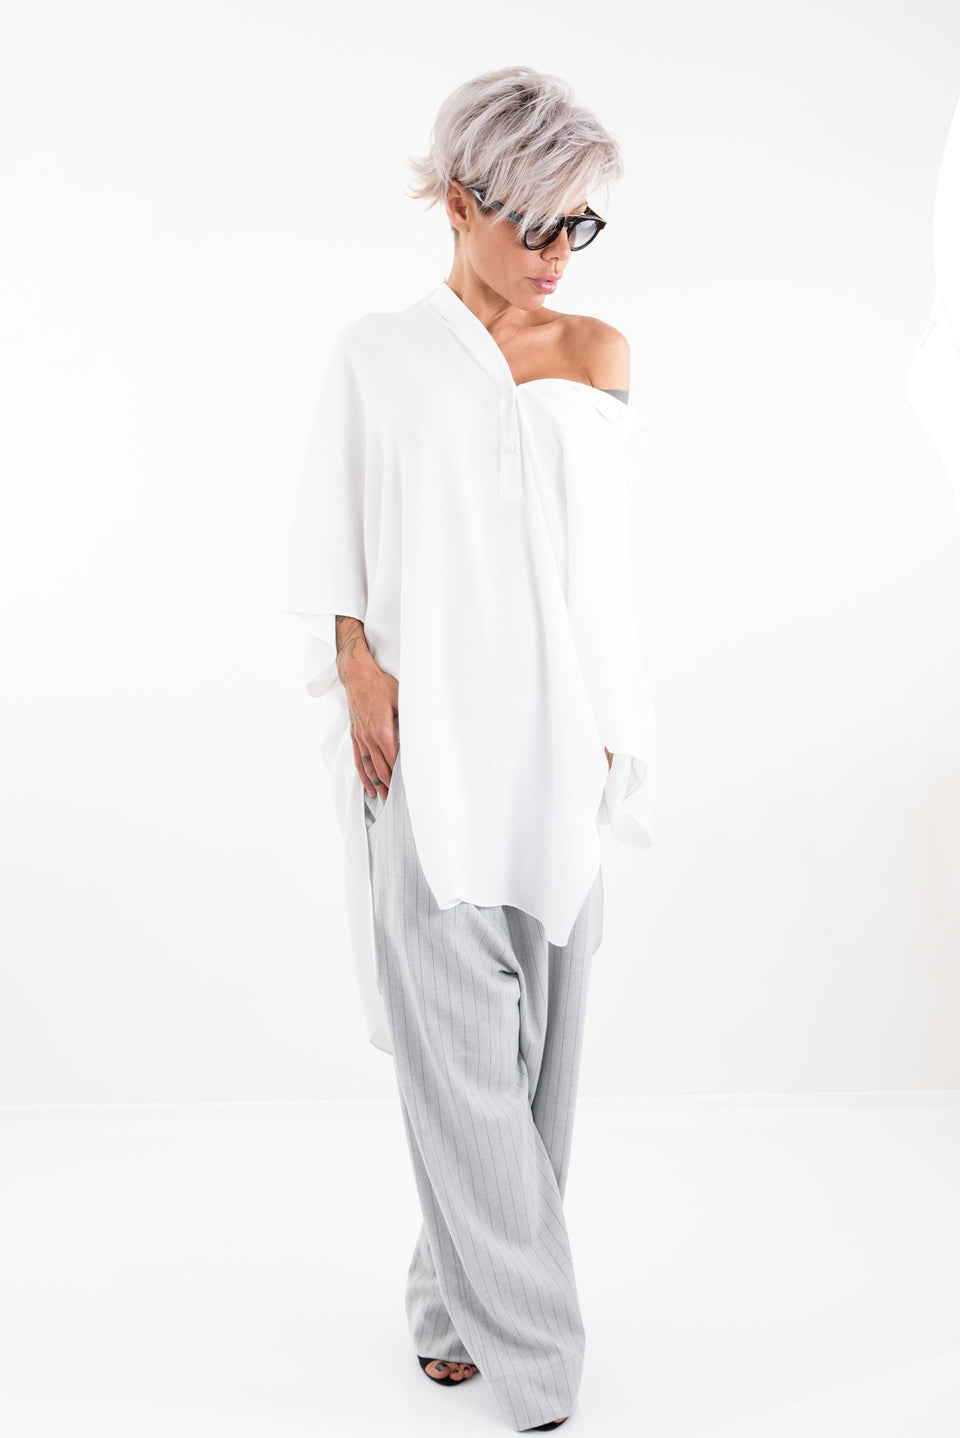 White Loose Oversize Shirt with Falling Shoulder - Clothes By Locker Room